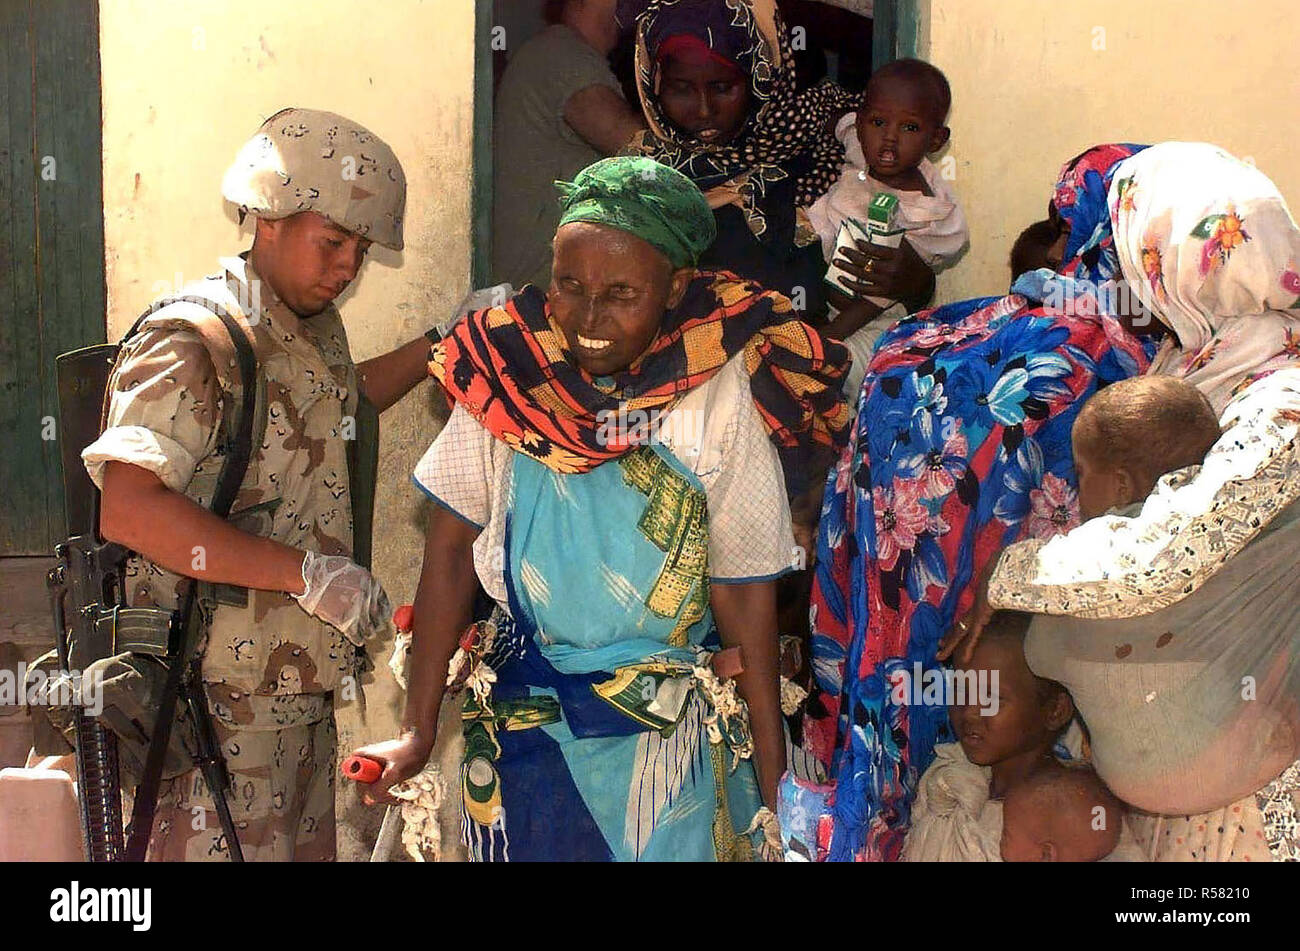 1993 - A US Marine helps a Somali woman on crutches from a clinic in Mogadishu, Somalia, where US Navy doctors (not shown) conducted a medical civic action program in the capital city. Stock Photo